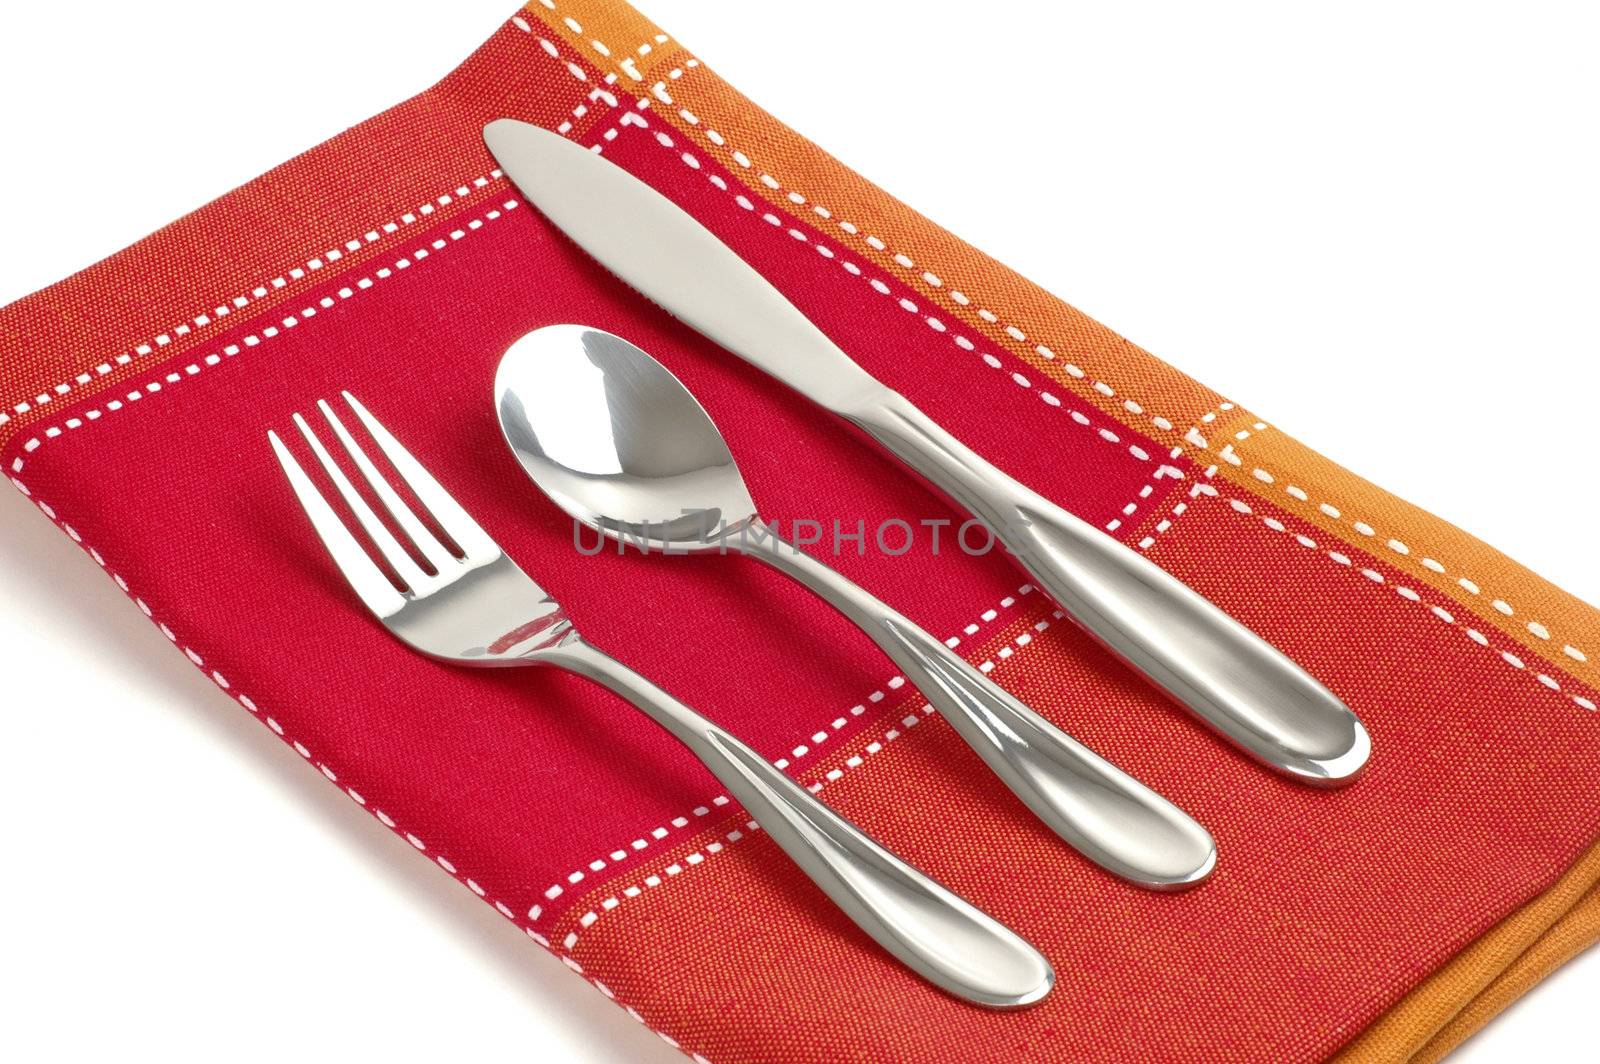 Silver eating utensils on a colorful  linen napkin.